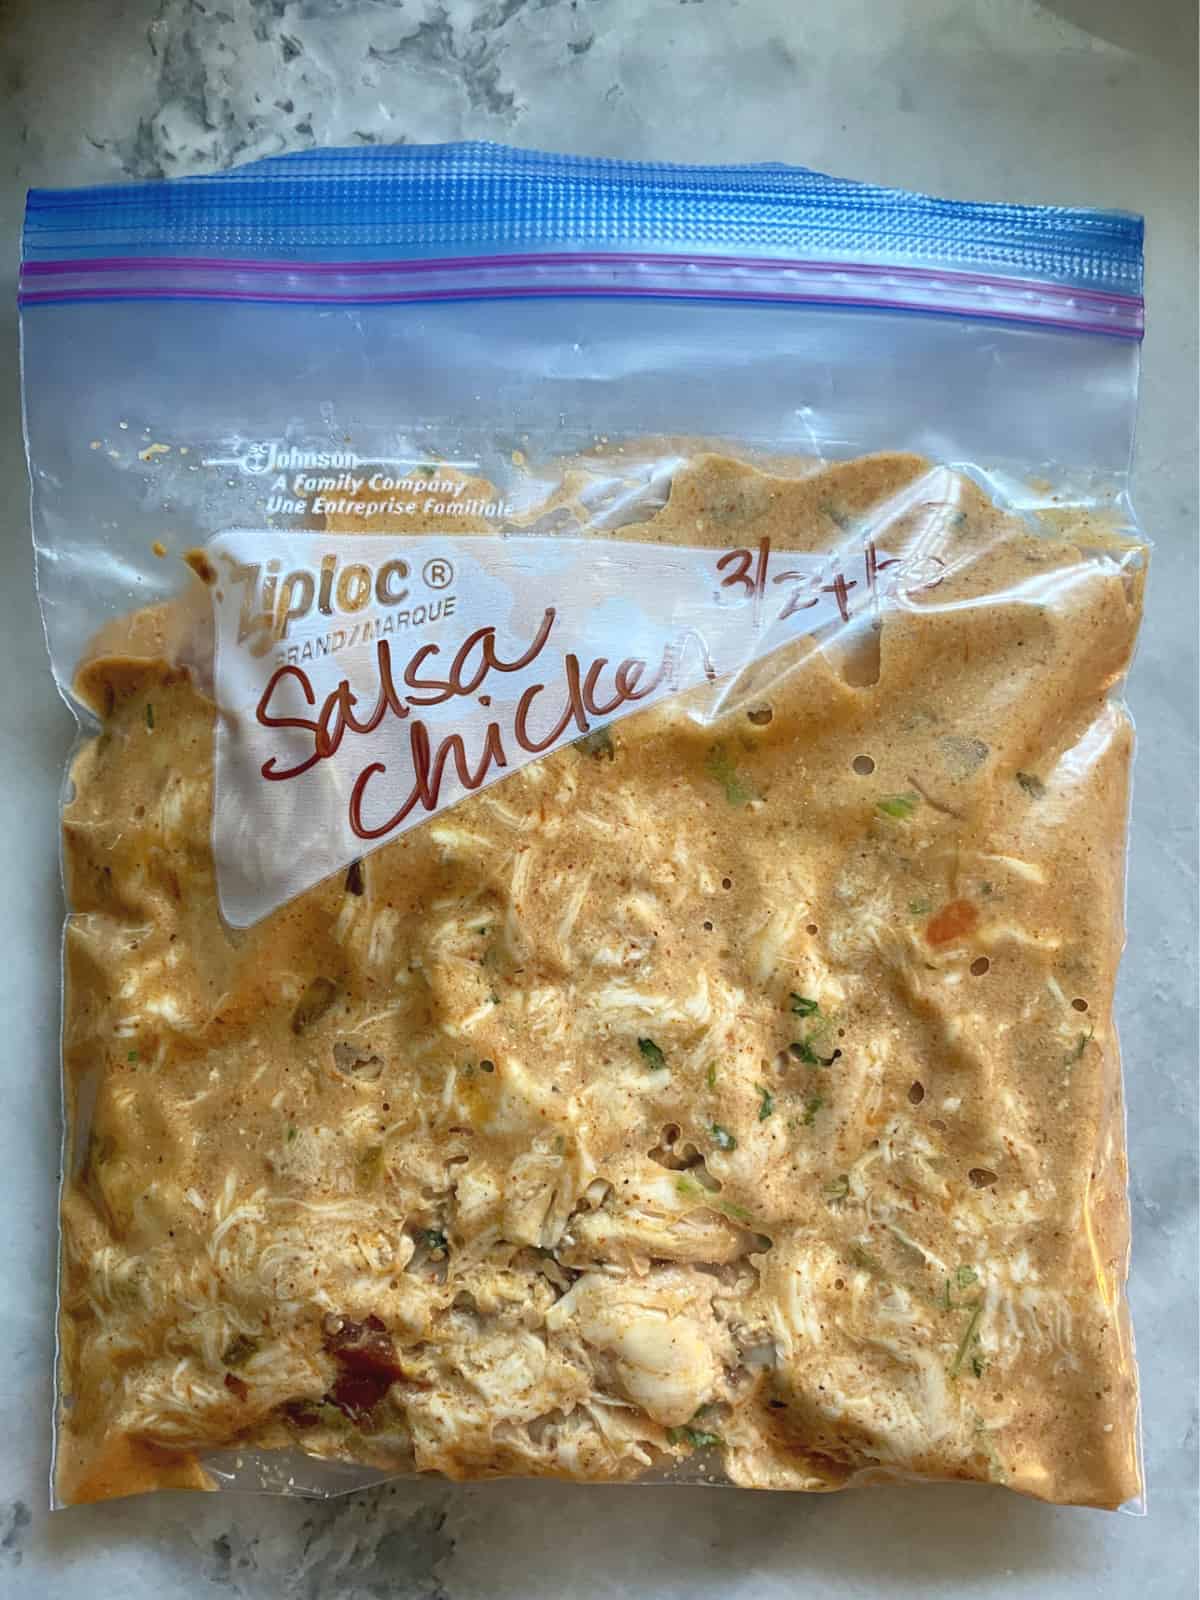 Quart size Ziploc bag labeled and fileld with Salsa chicken with date on bag.